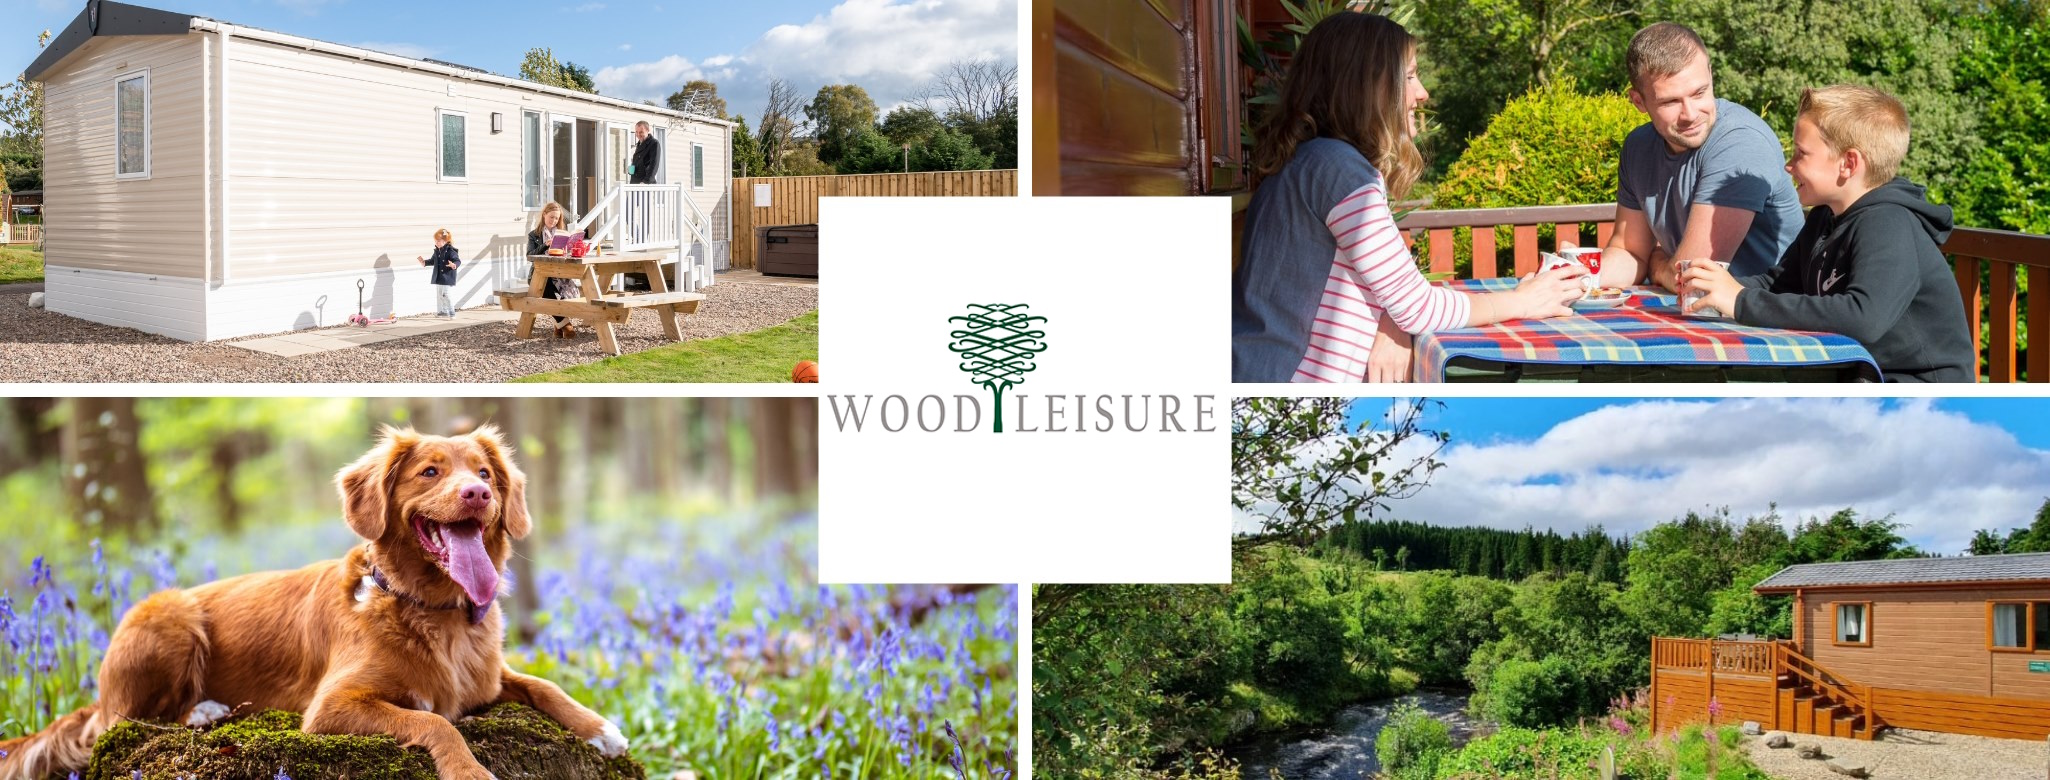 woodleisure holiday park nhs discount